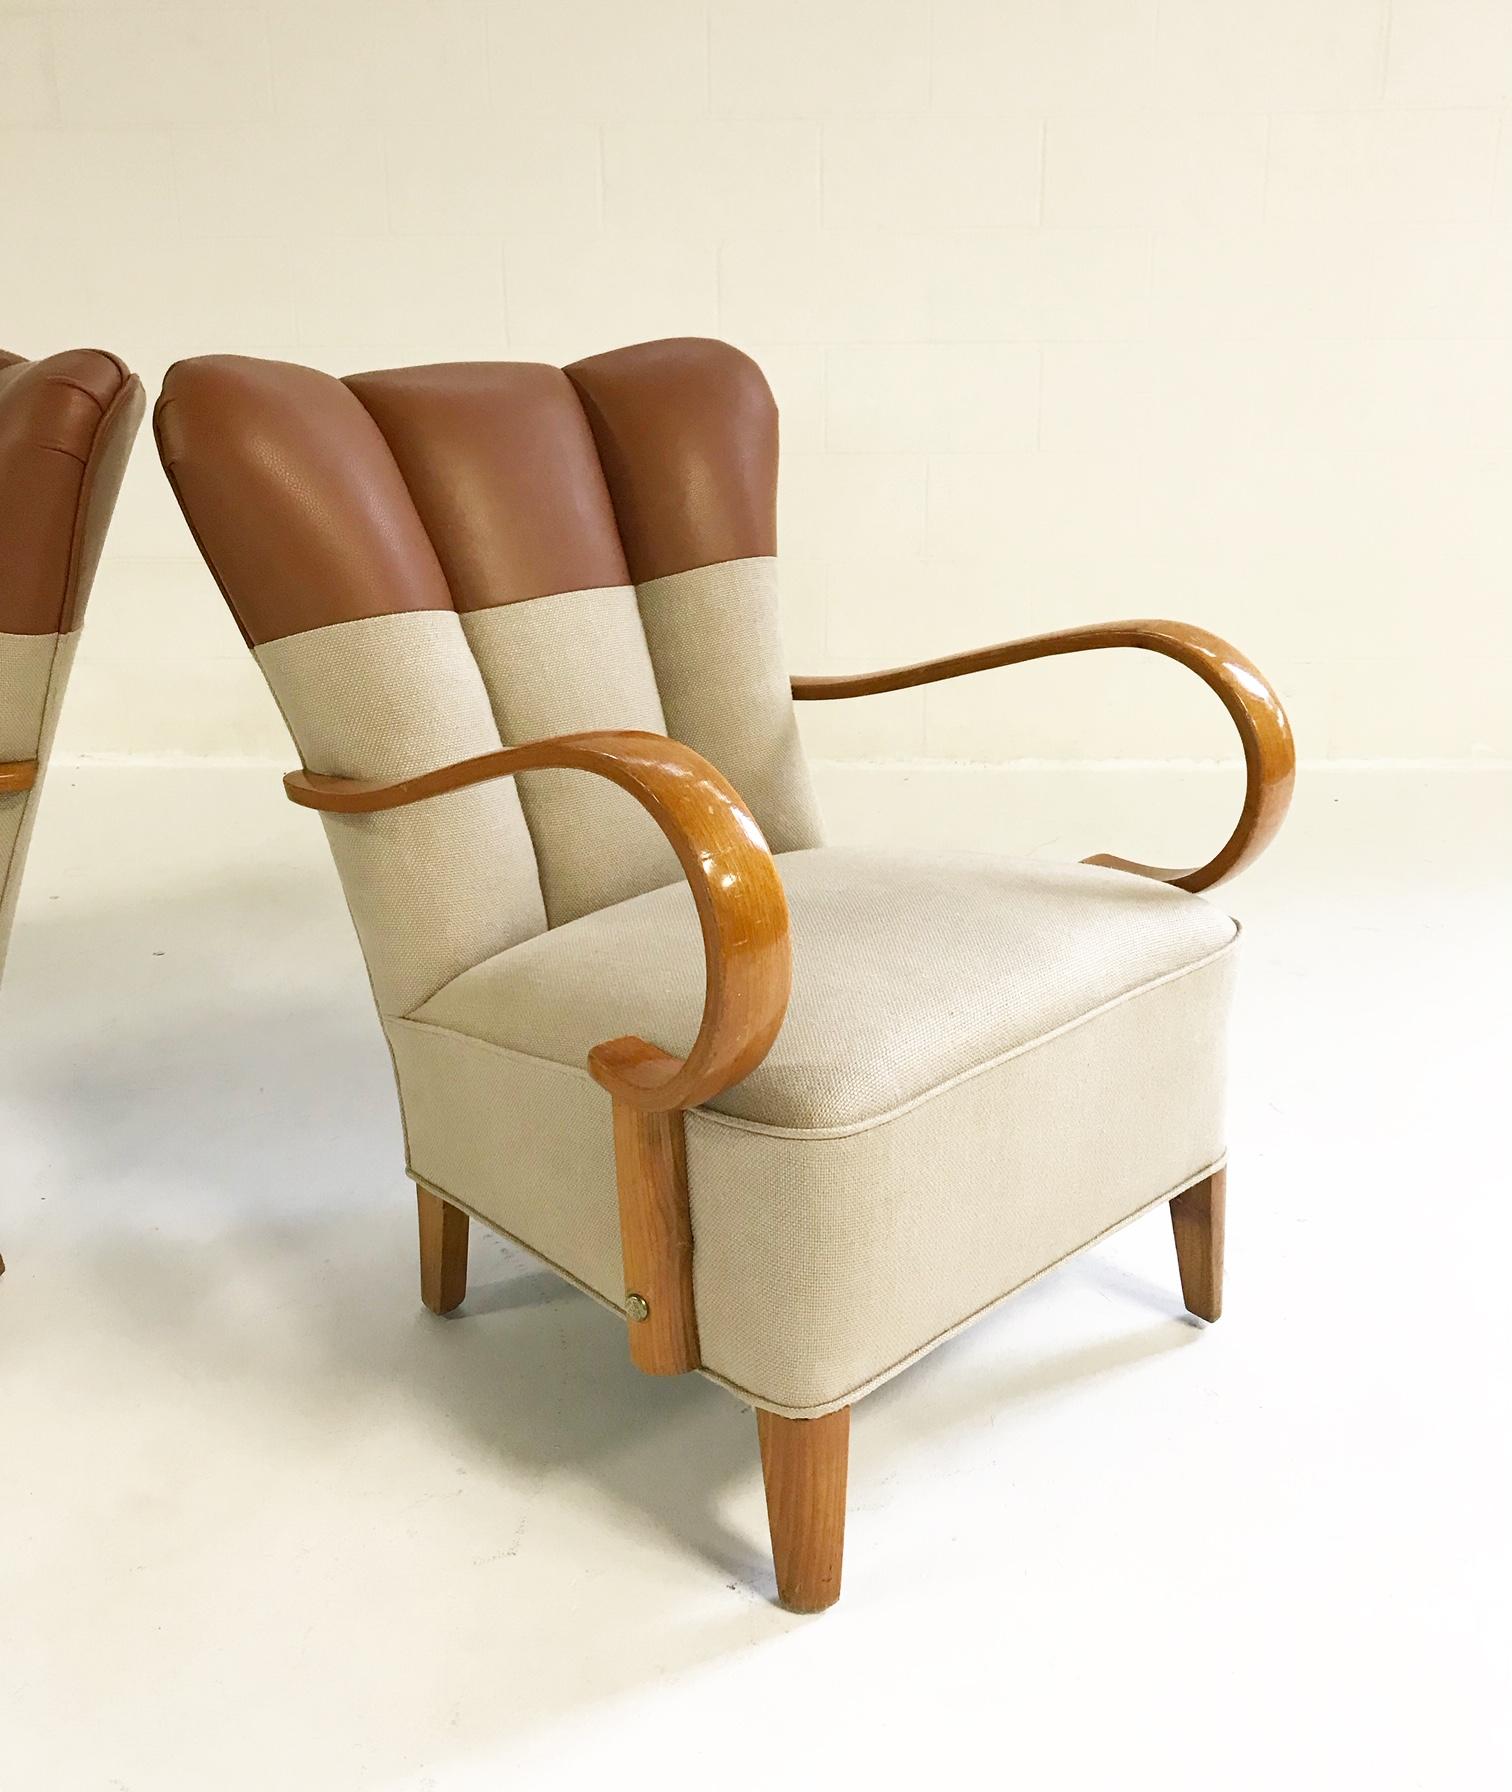 These are one of the most unique chairs we have ever collected. The fluid and curving bentwood arms are so beautiful. And we adore the long tufts on the back of the chair. This distinct design allowed us to get creative with the upholstery. After